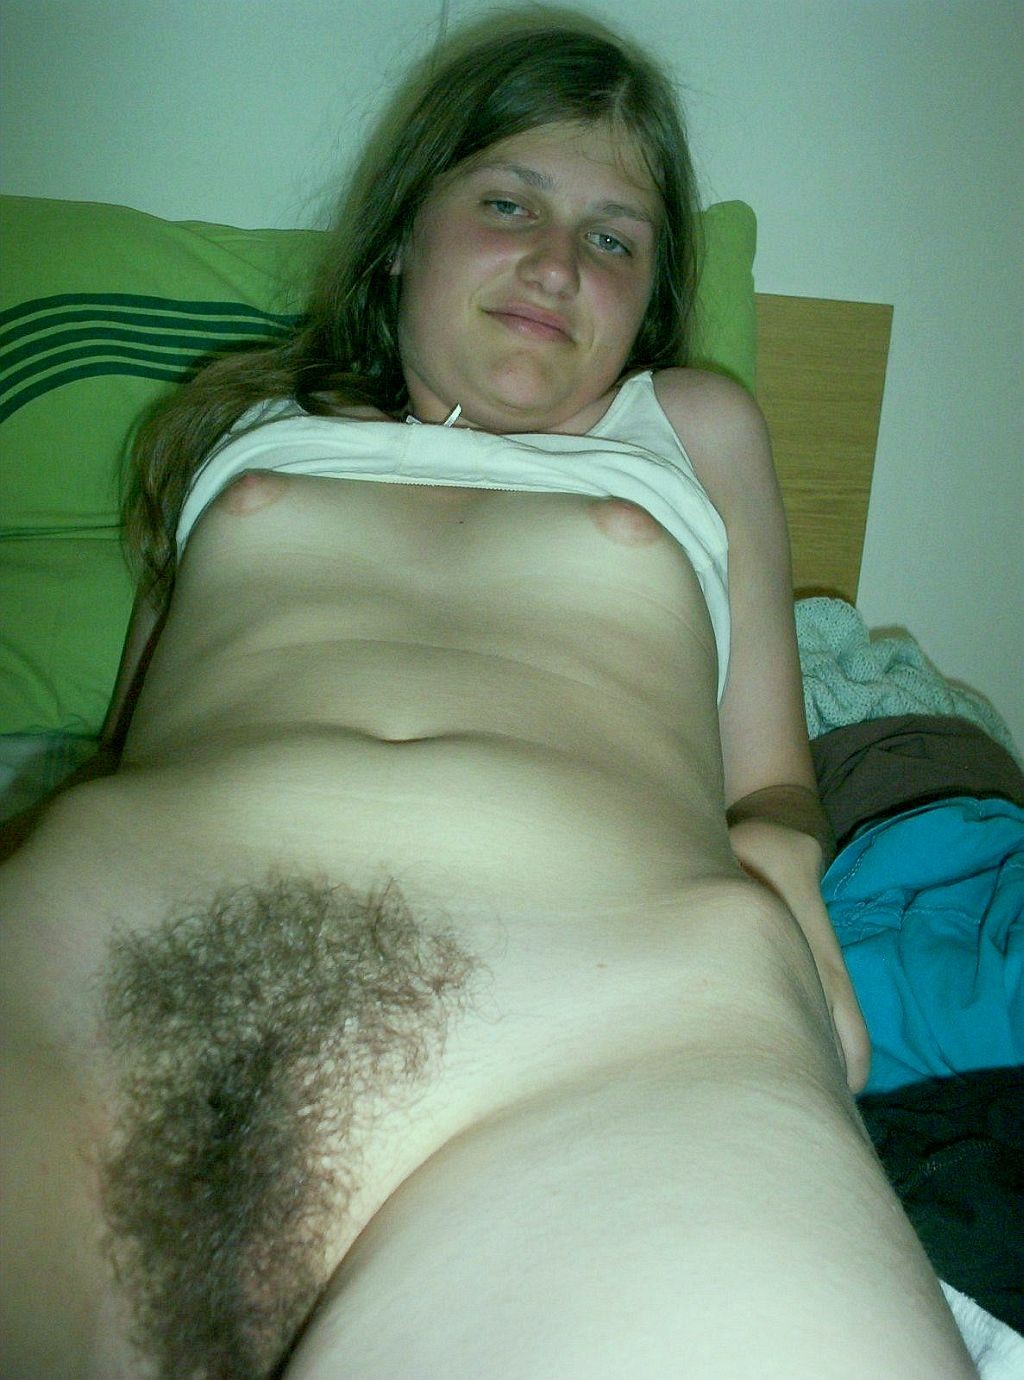 hairy amateur teen pictures